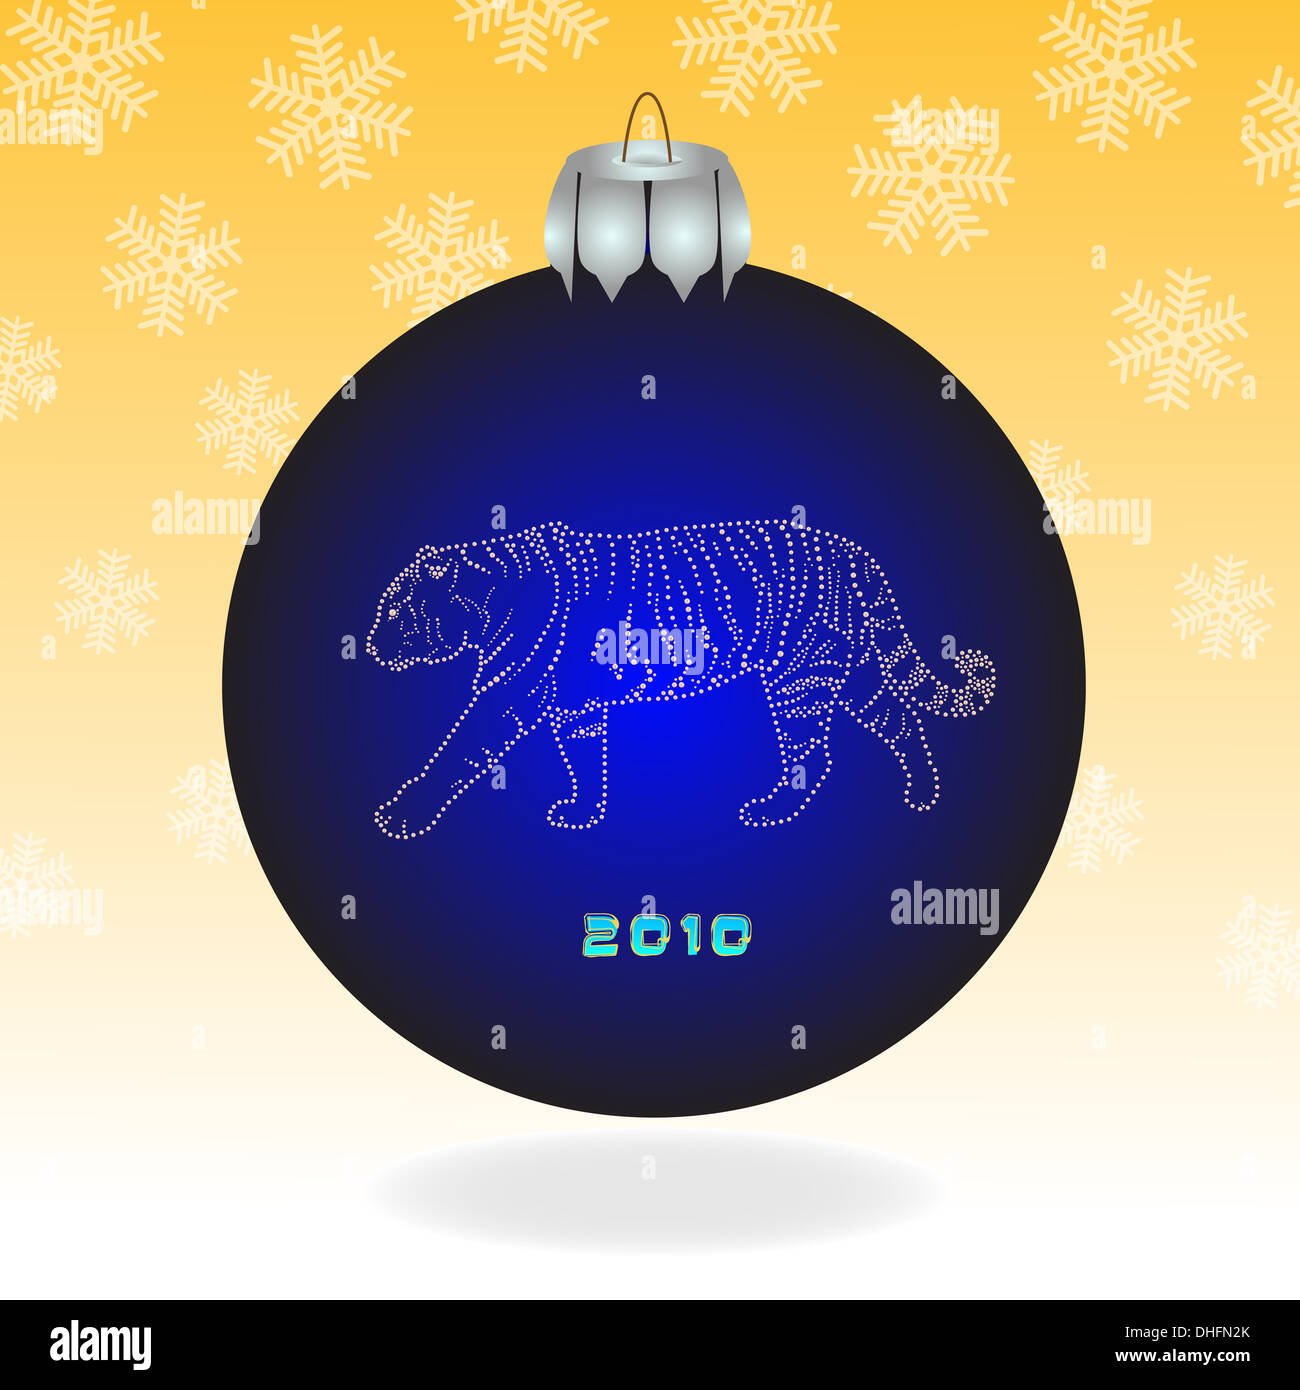 Dark blue fur-tree ball with a tiger on an orange background with snowflakes. Stock Photo